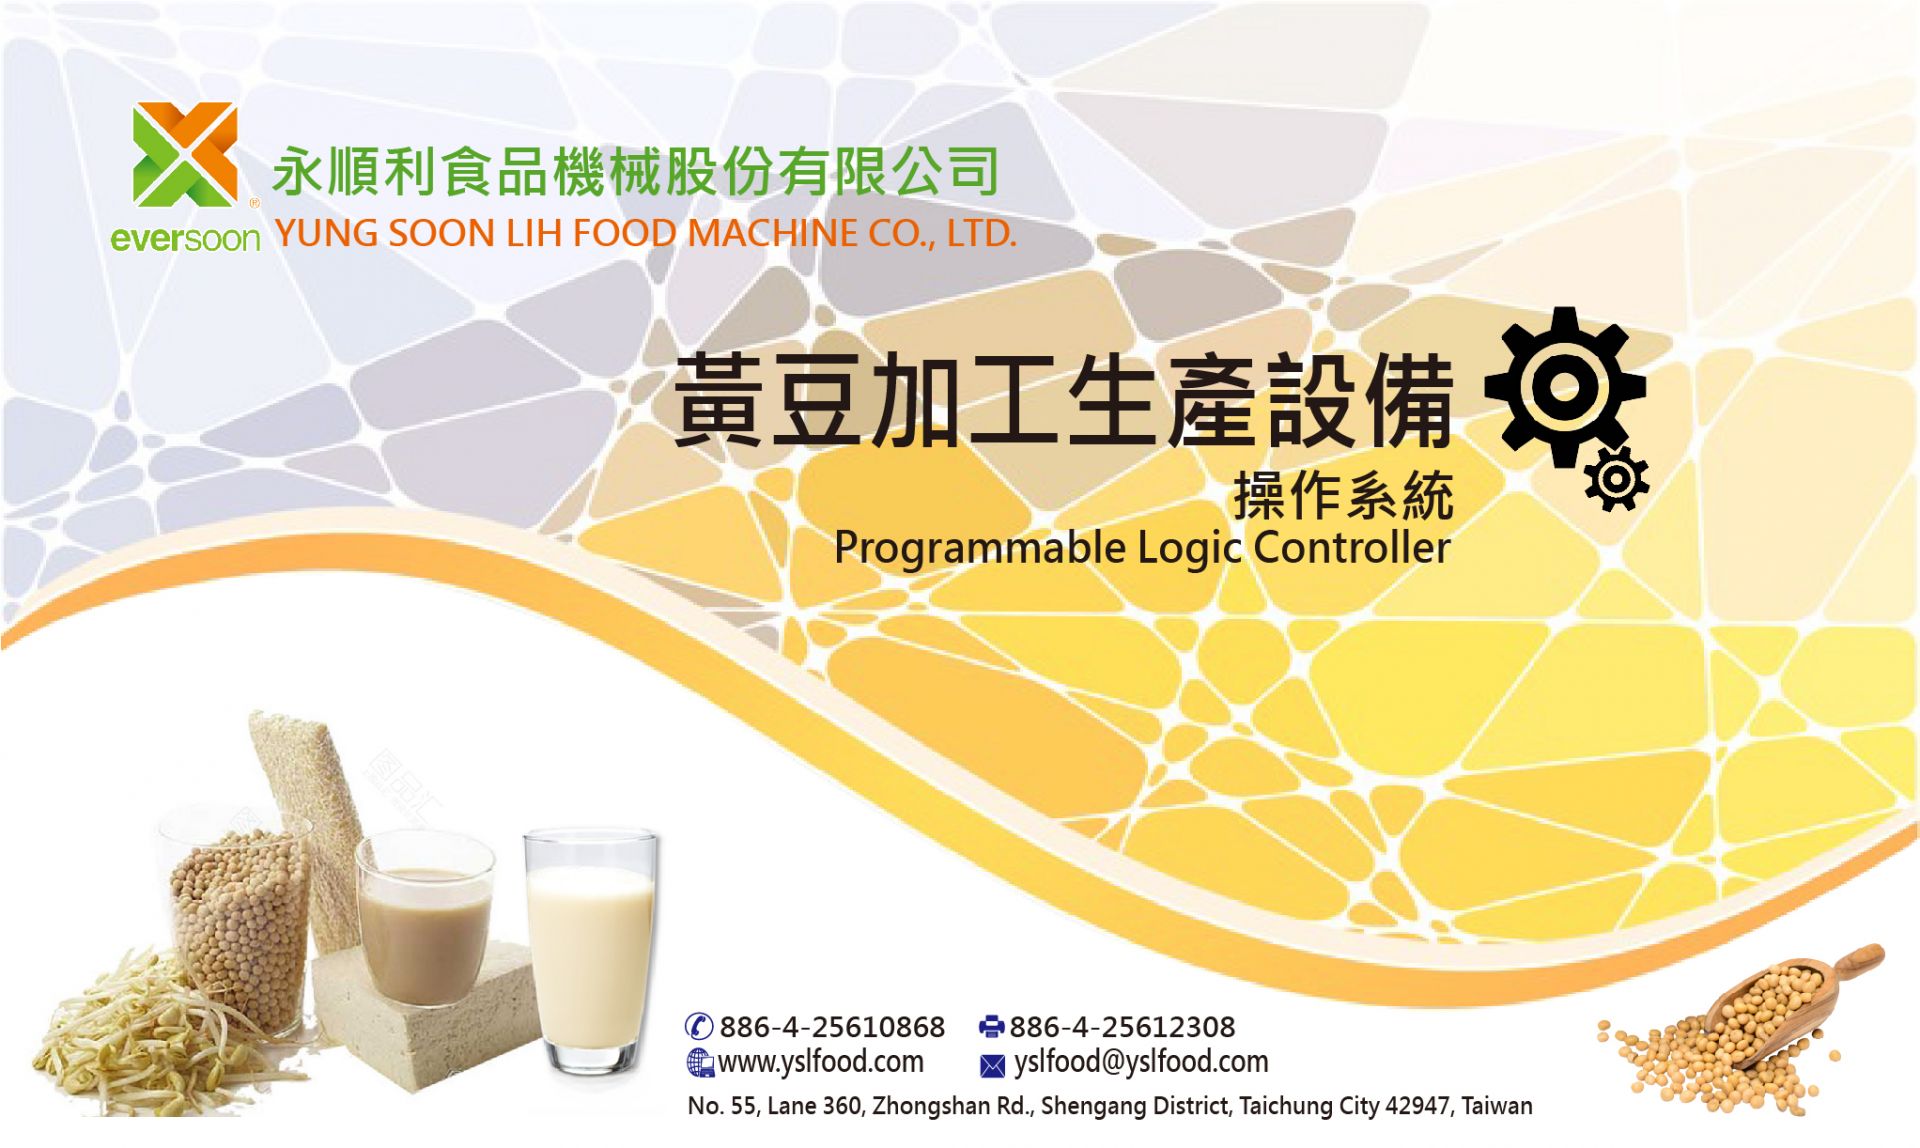 Grinding And Separating Machine, grinding of soybean, soy bean grinder, soy grinder, soya bean grinder, soya bean grinder and separator, soya grinder, soya grinder machine, soya grinder with separator, soybean machine, soybean milk grinding machine, soybean stone grinder, tofu grinder, tofu grinder machine, food equipment